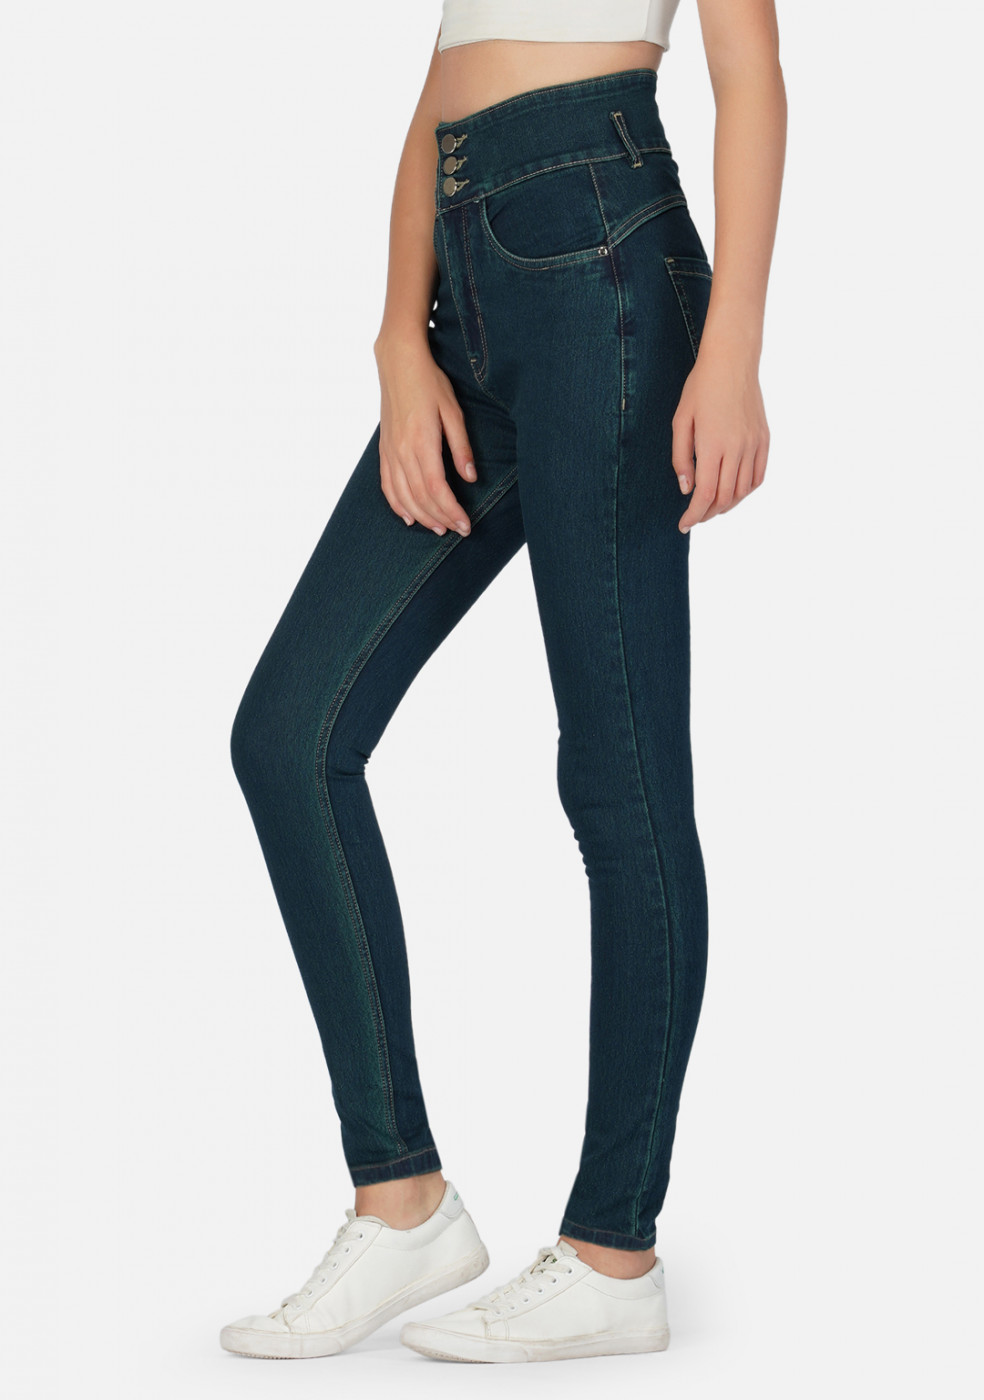 TINT Stretchable Cotton Jeans For Women